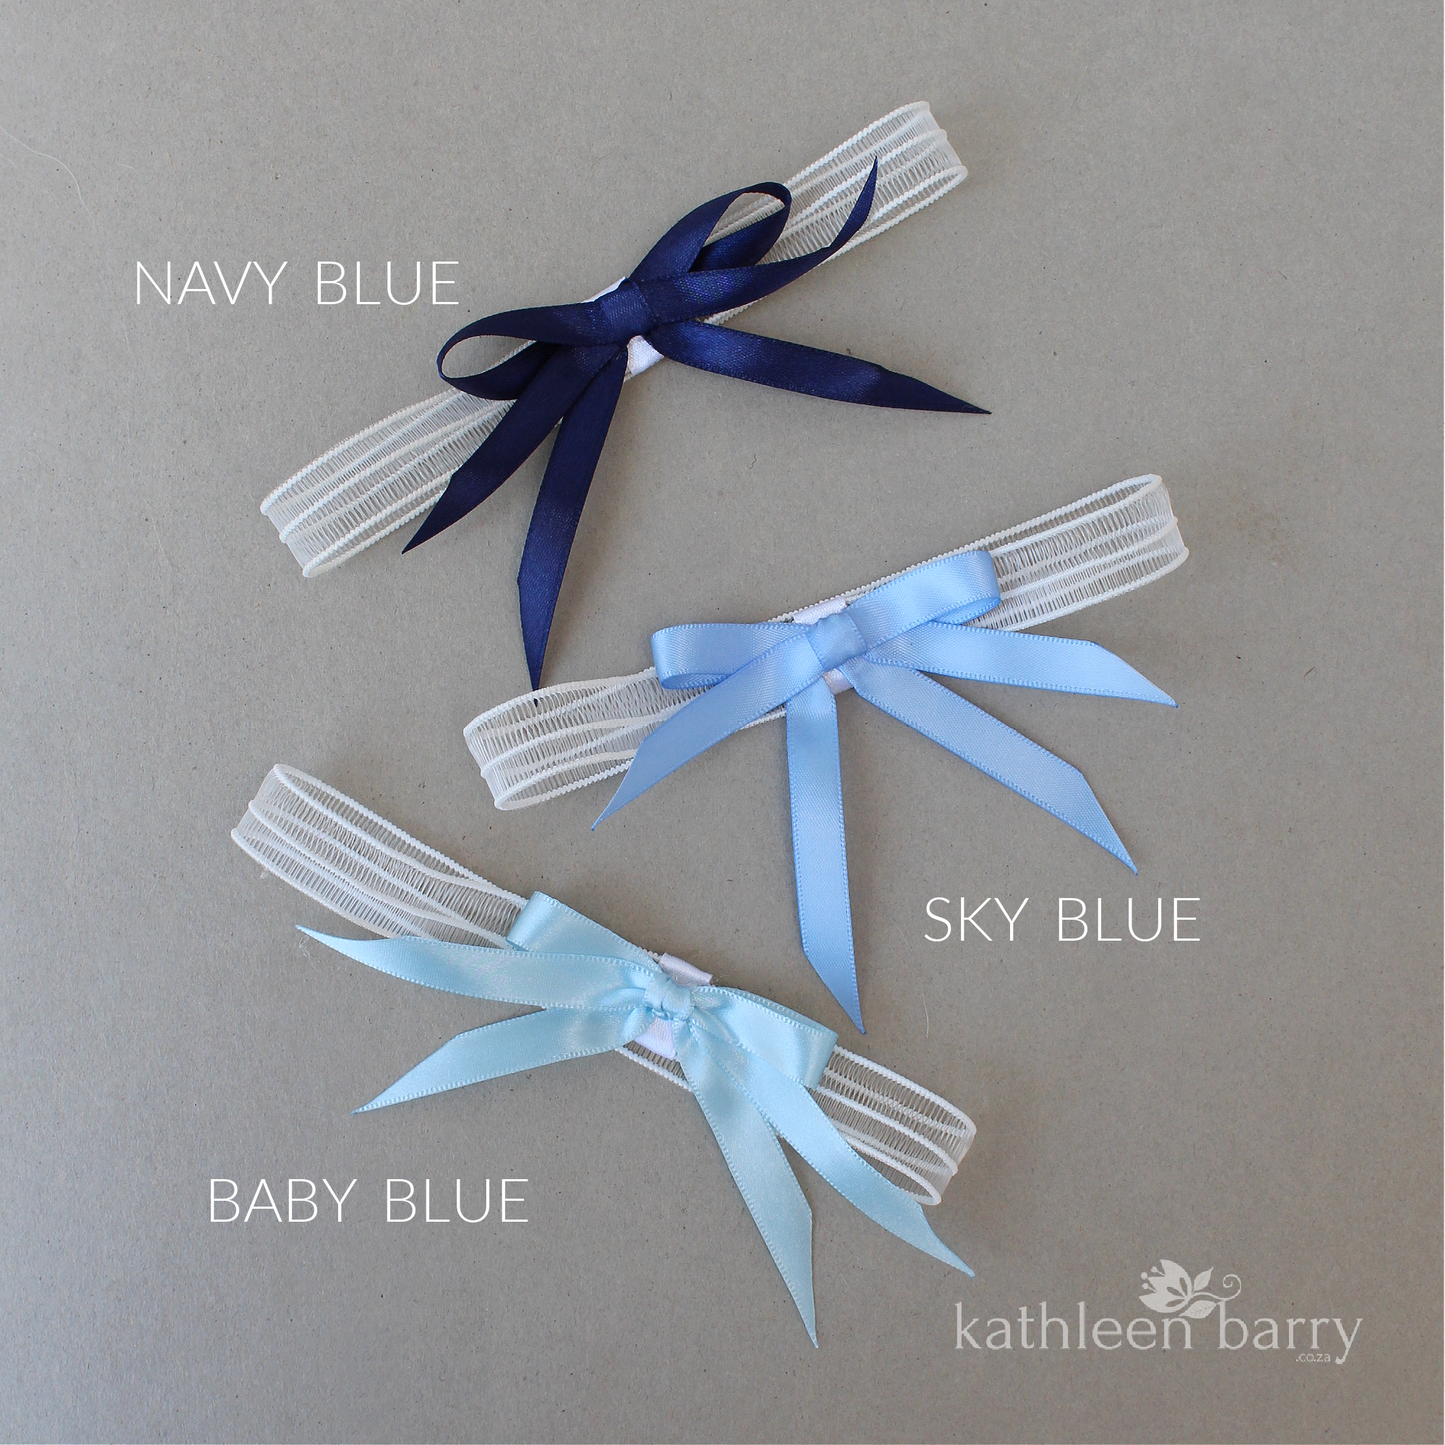 Something Blue Bridal tossing garter - assorted colors available, satin bow - (sold separately)